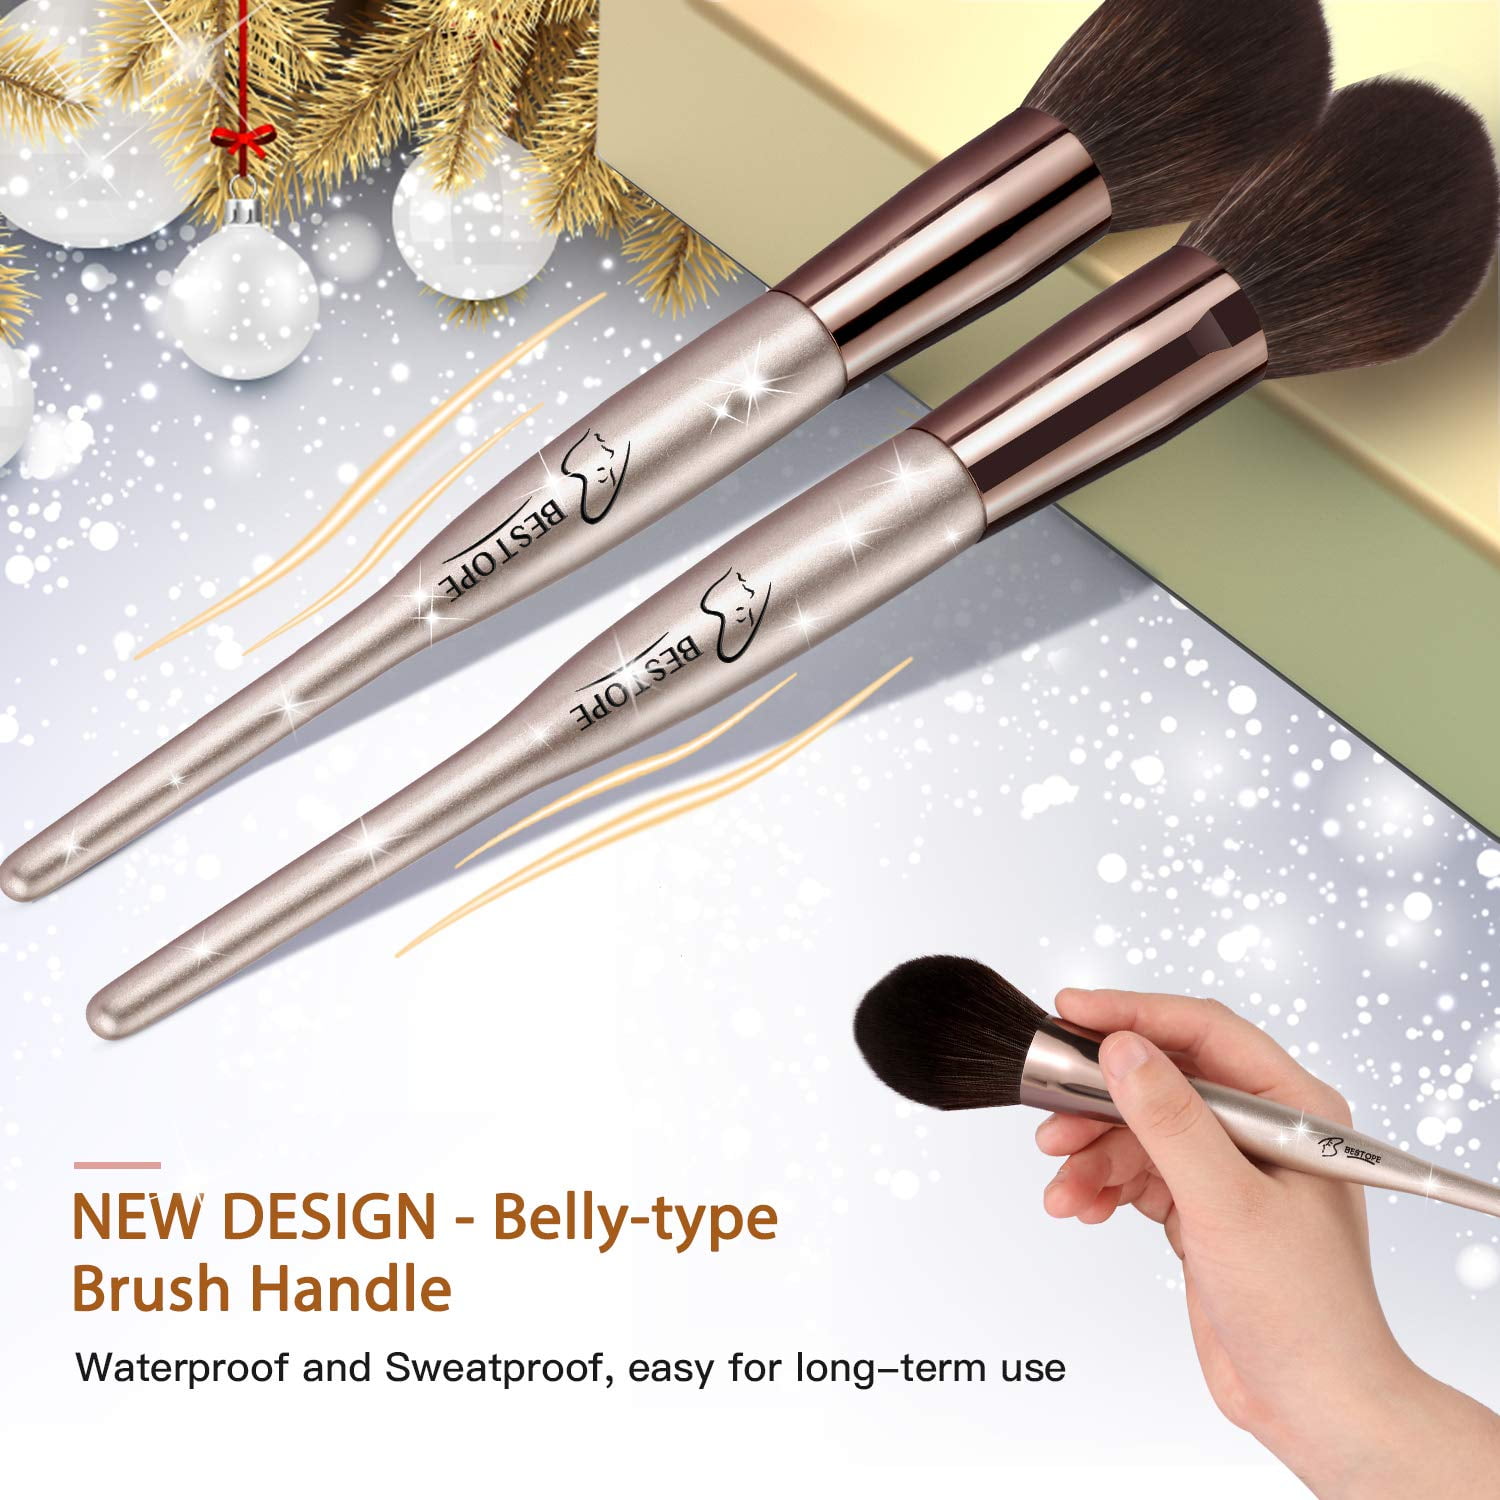 BESTOPE 18 Pcs Makeup Brushes Belly-Type Handle Premium Synthetic Contour Blush Foundation Concealers Eye Shadows Cosmetic Brushes - Walmart.com